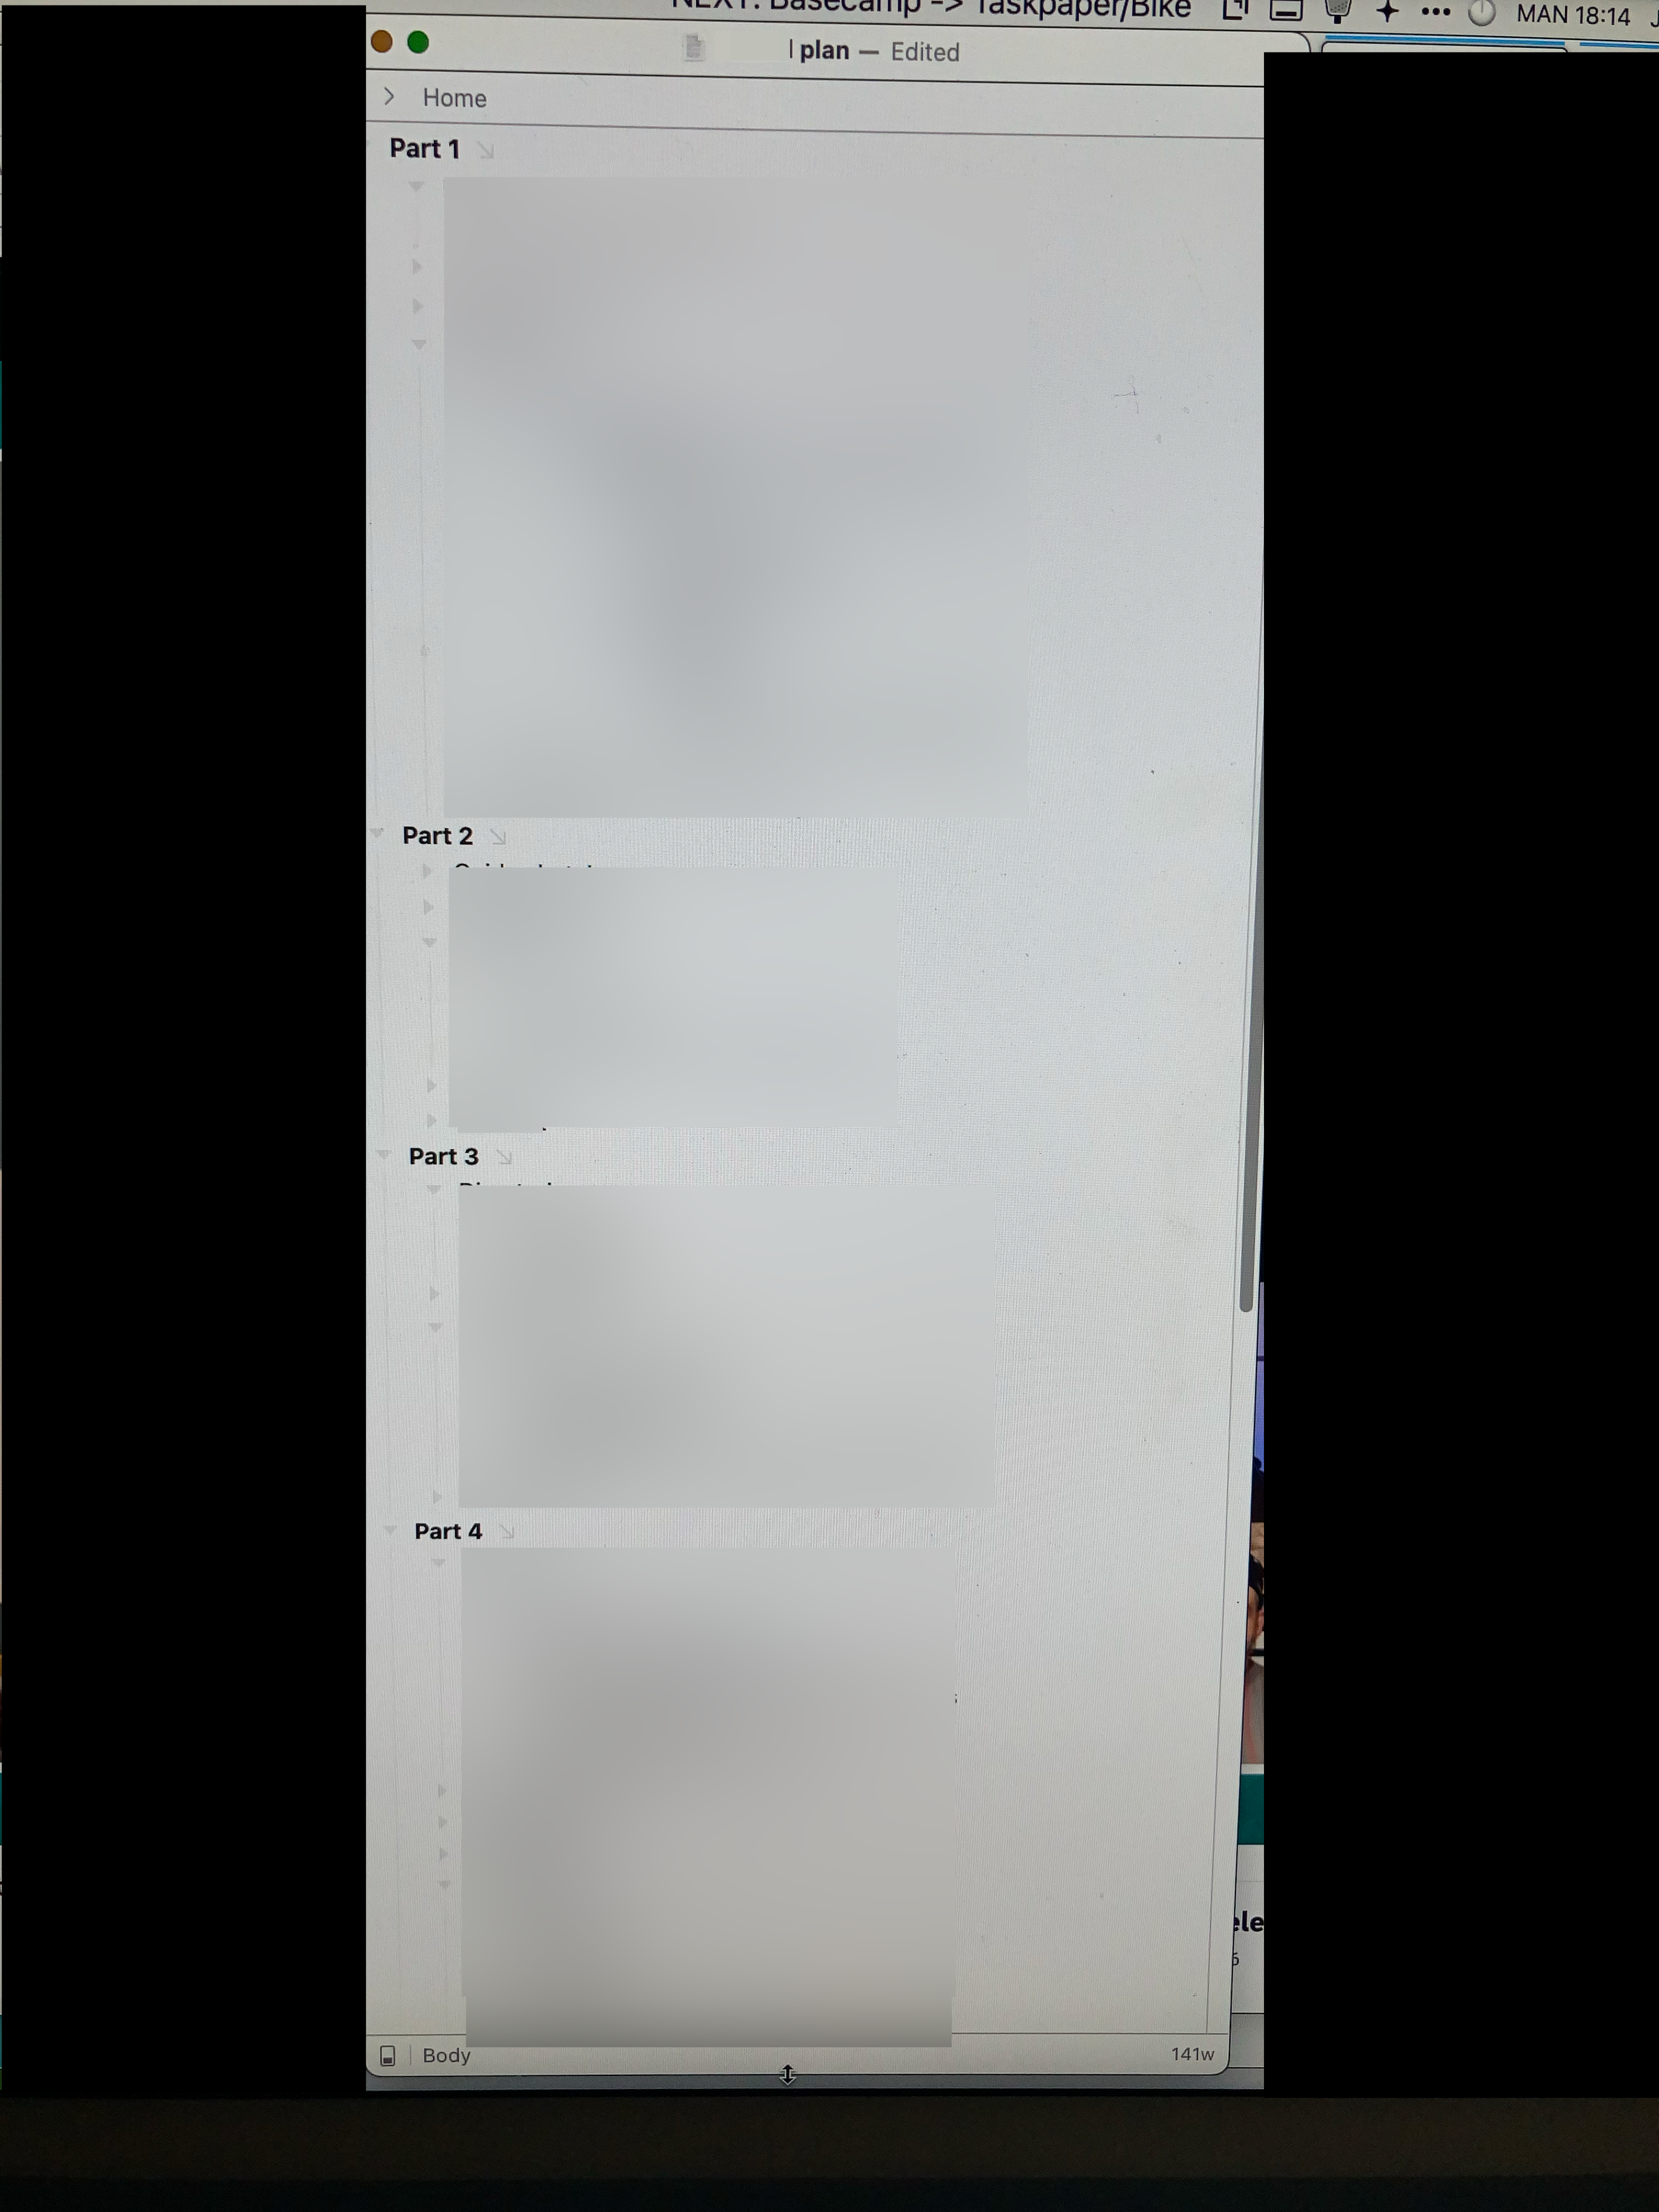 A computer screen, showing almost no detail from an outline document as well as blacked-out sections to avoid sharing non-relevant images.